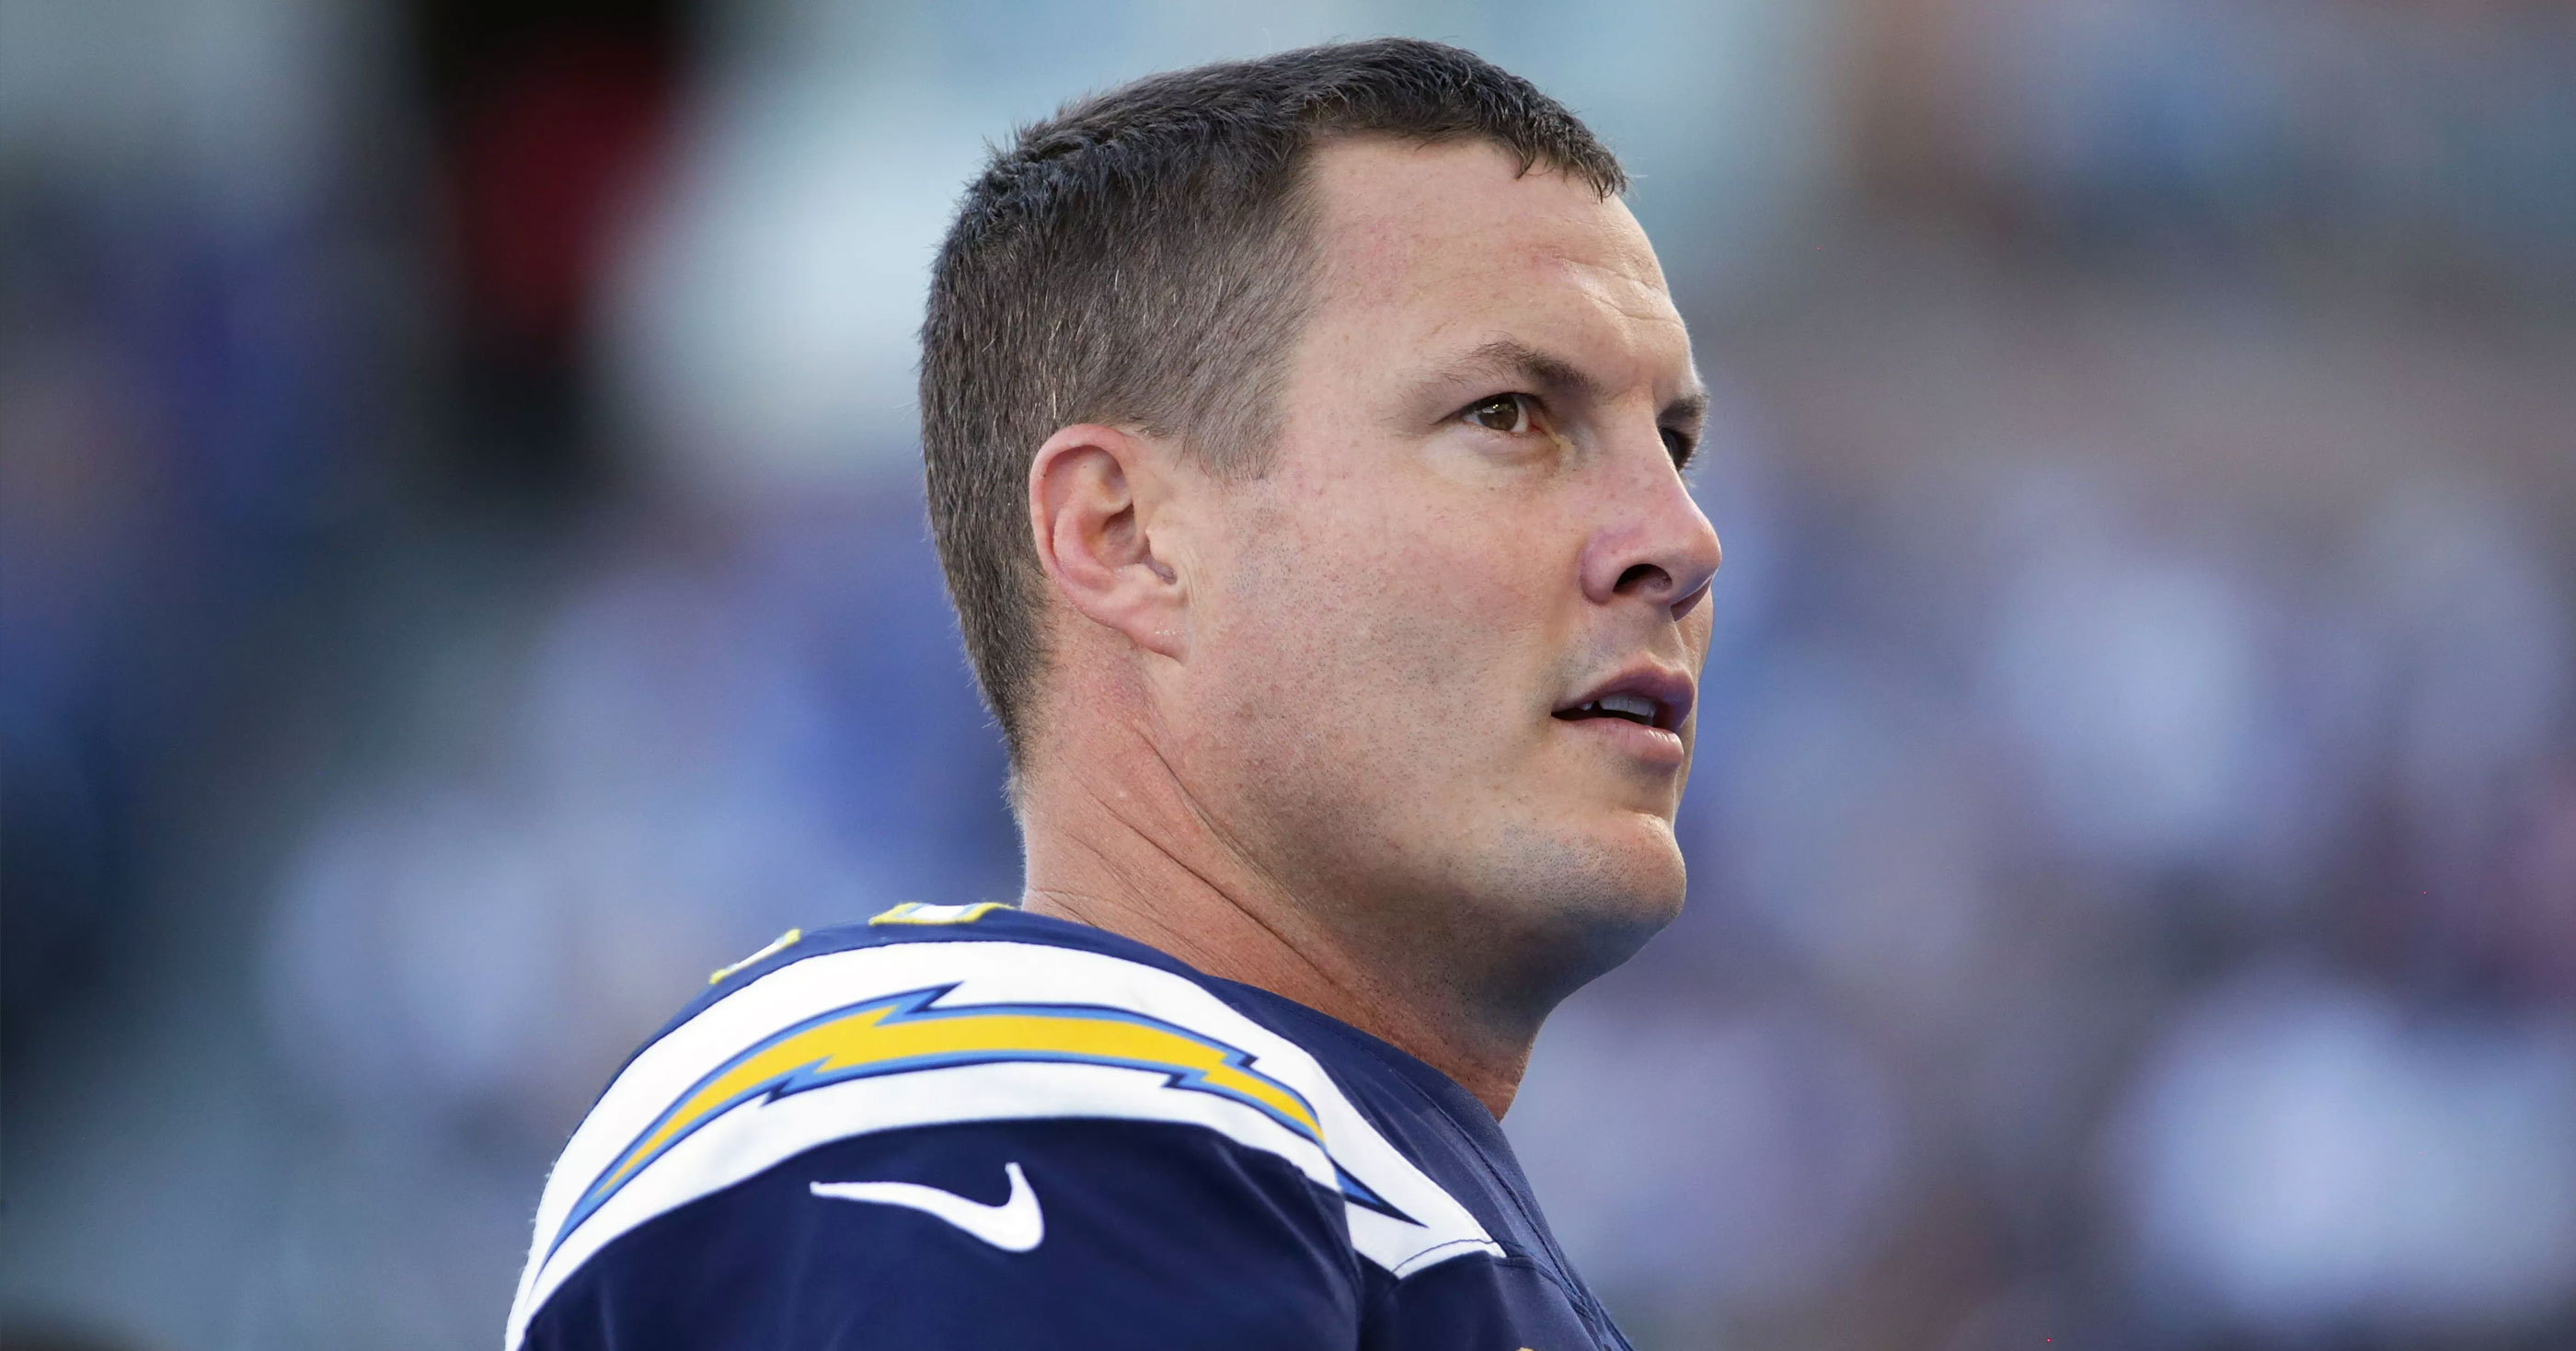 Phillip Rivers Expecting 9th Child, Can Now Field An Entire Offense With Himself, His ...2800 x 1468